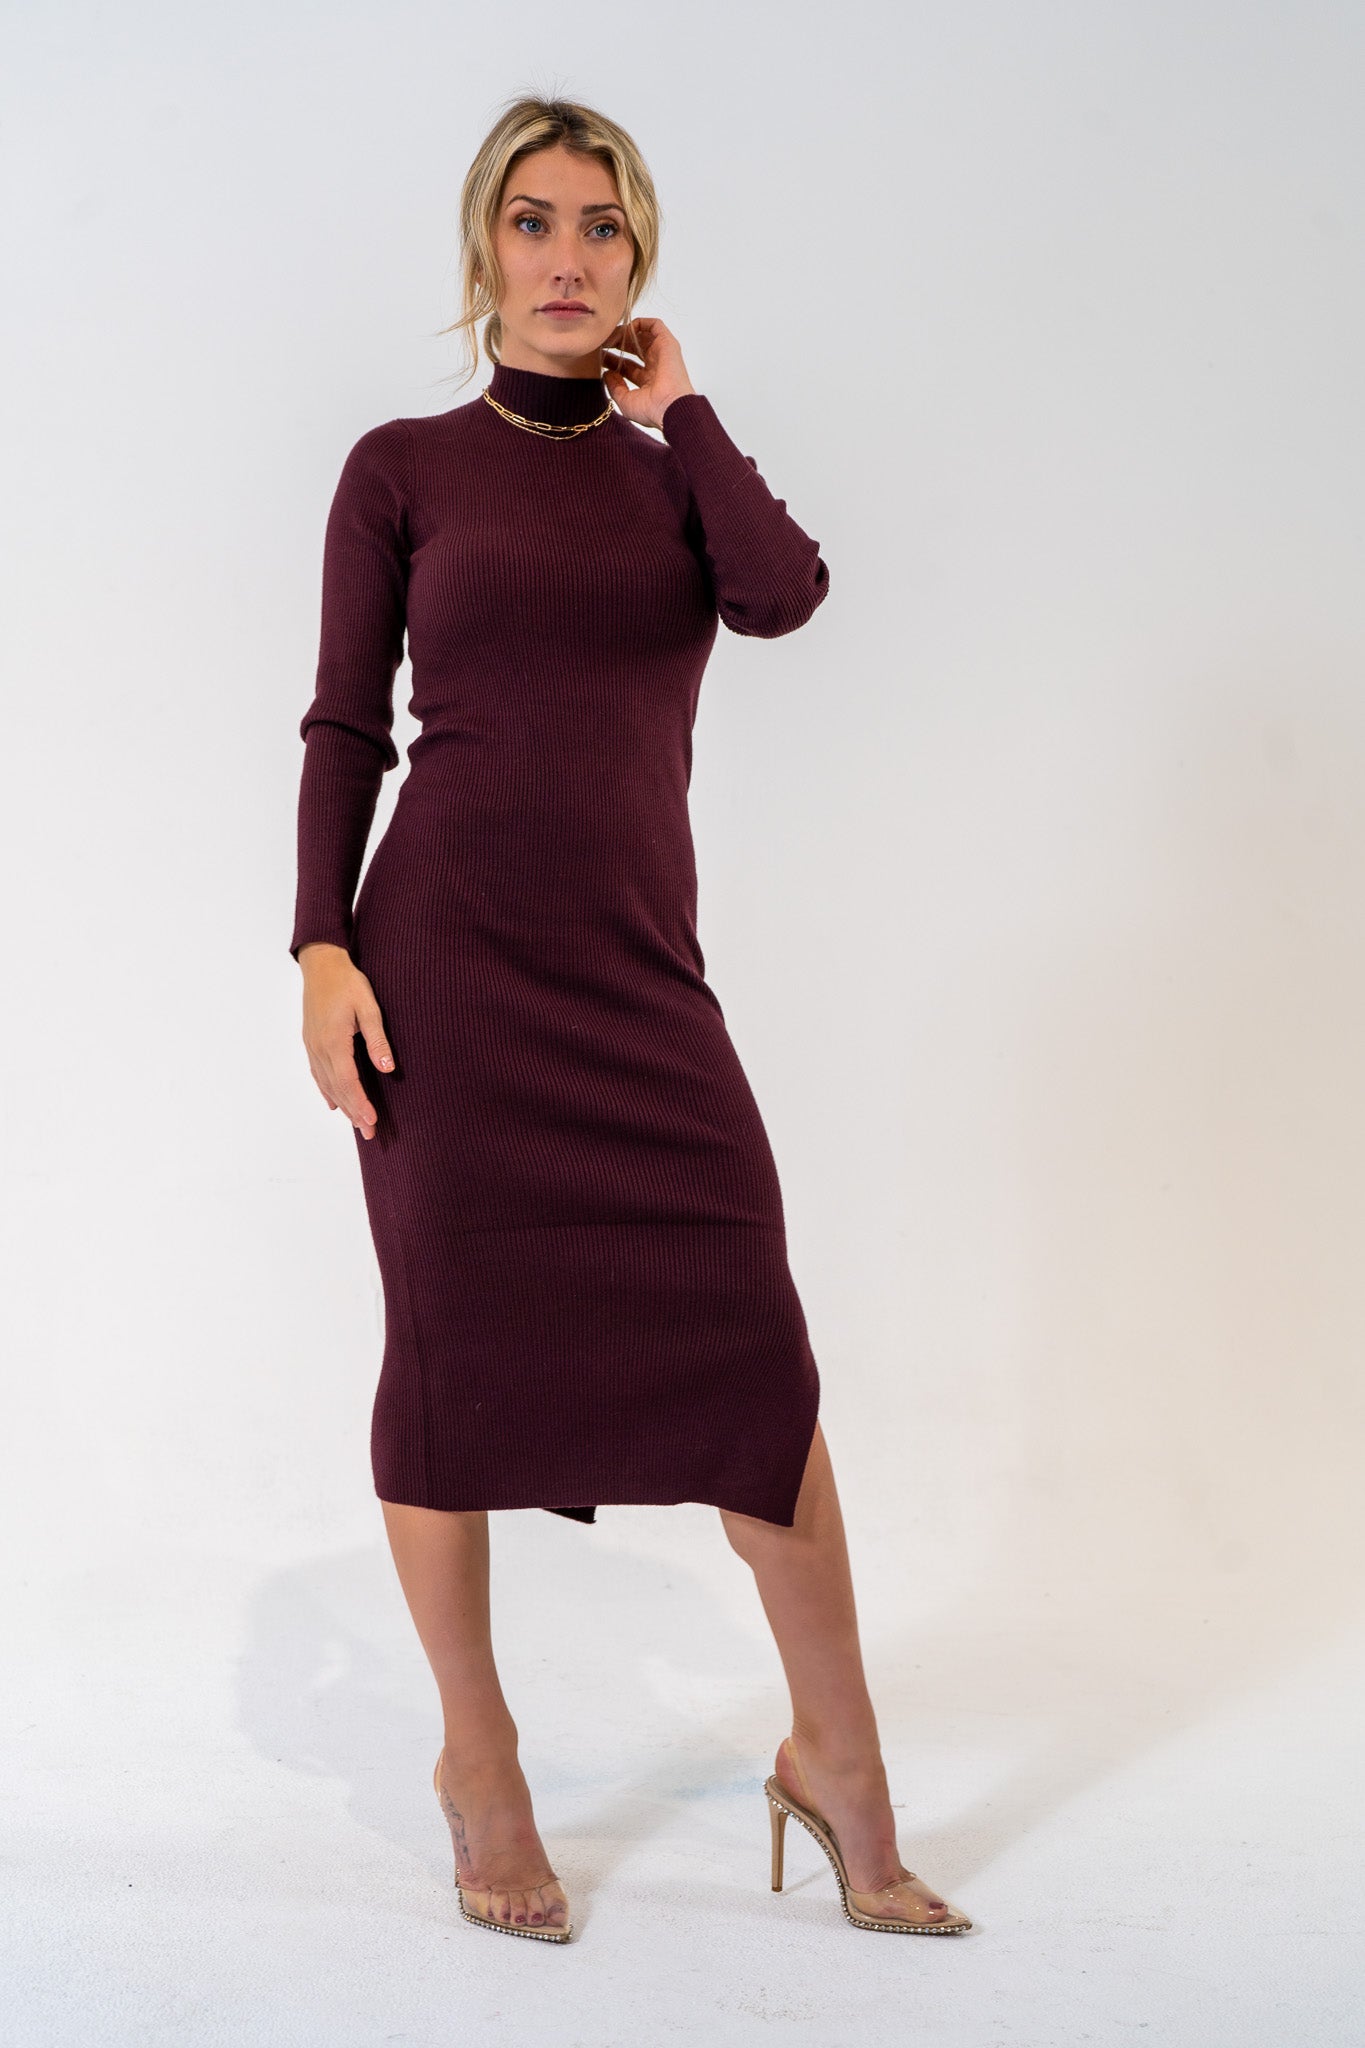 A holiday grab and go. The Playing Favorites dress is minimal and easy to style with just about everything. Ribbed bodycon fit, mock neck and side slit detail. Soft fabric but body hugging material to make sure all eyes are on you.